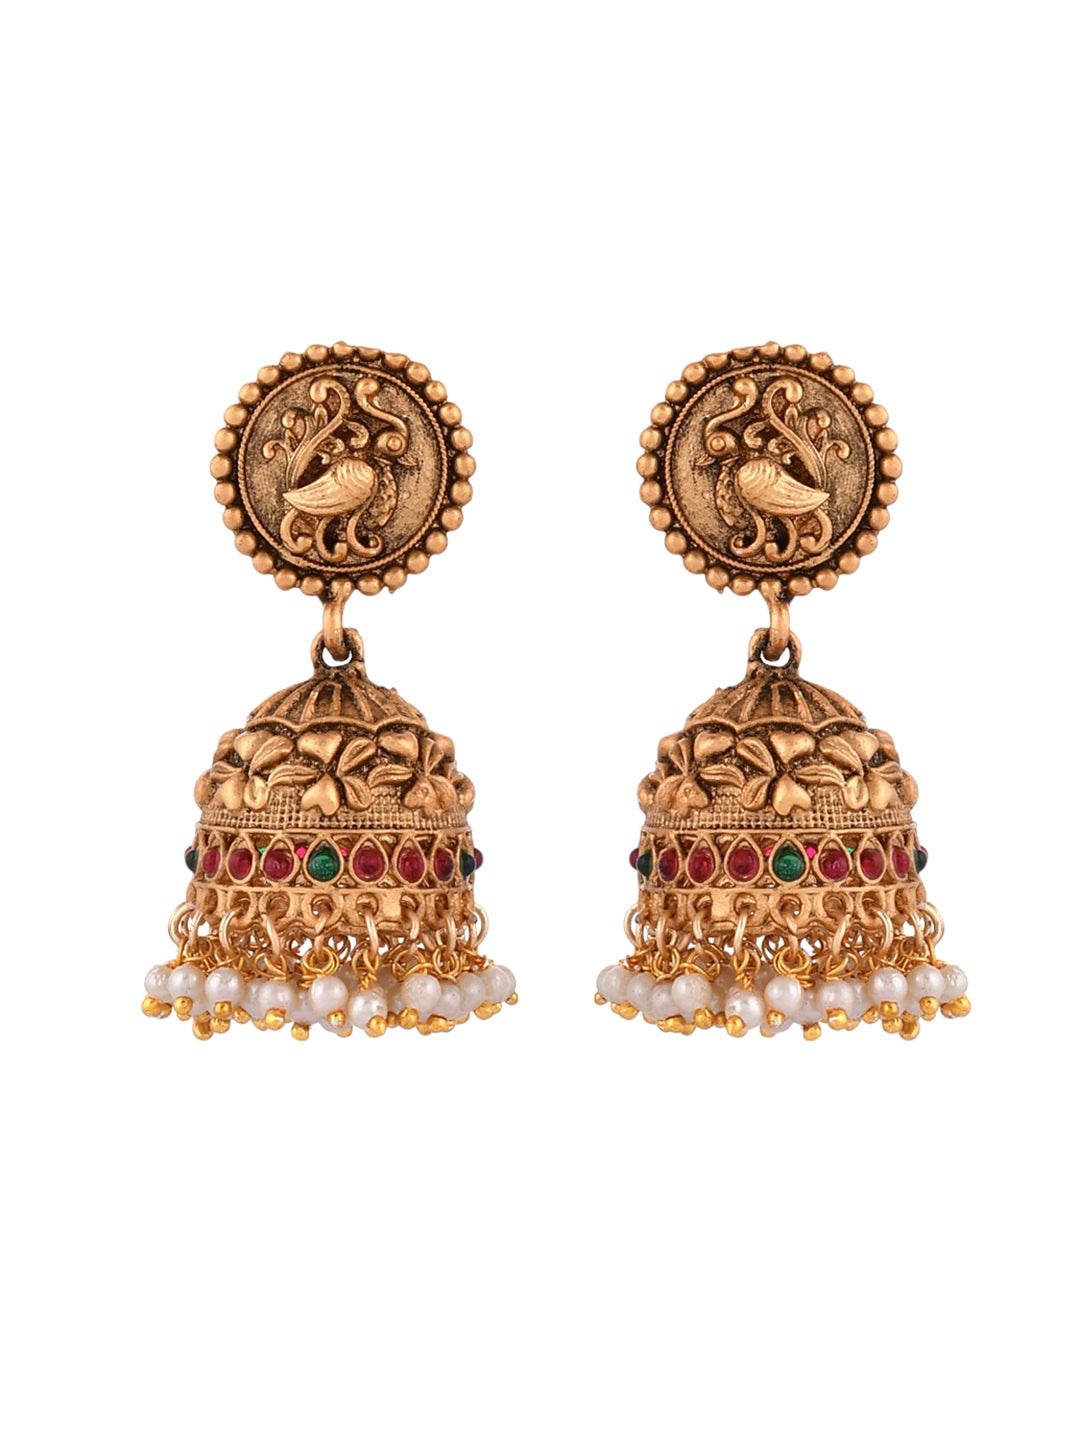 South indian gold plated temple jewelleryset